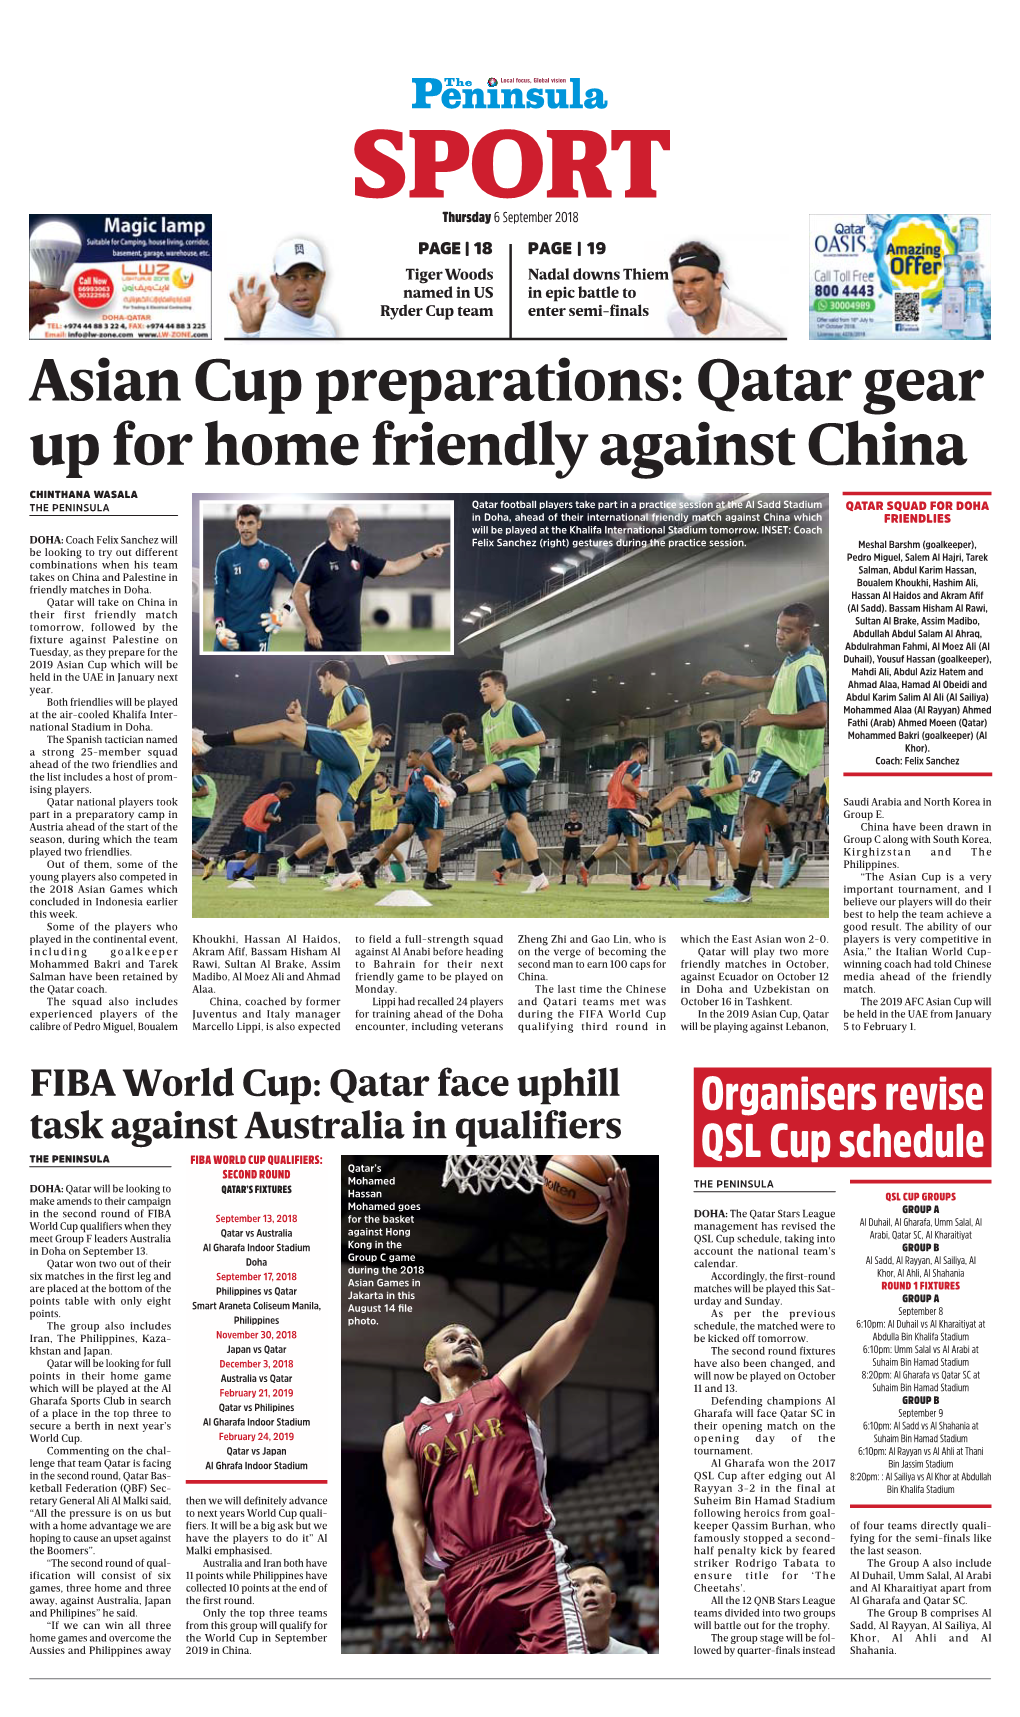 Asian Cup Preparations: Qatar Gear up for Home Friendly Against China